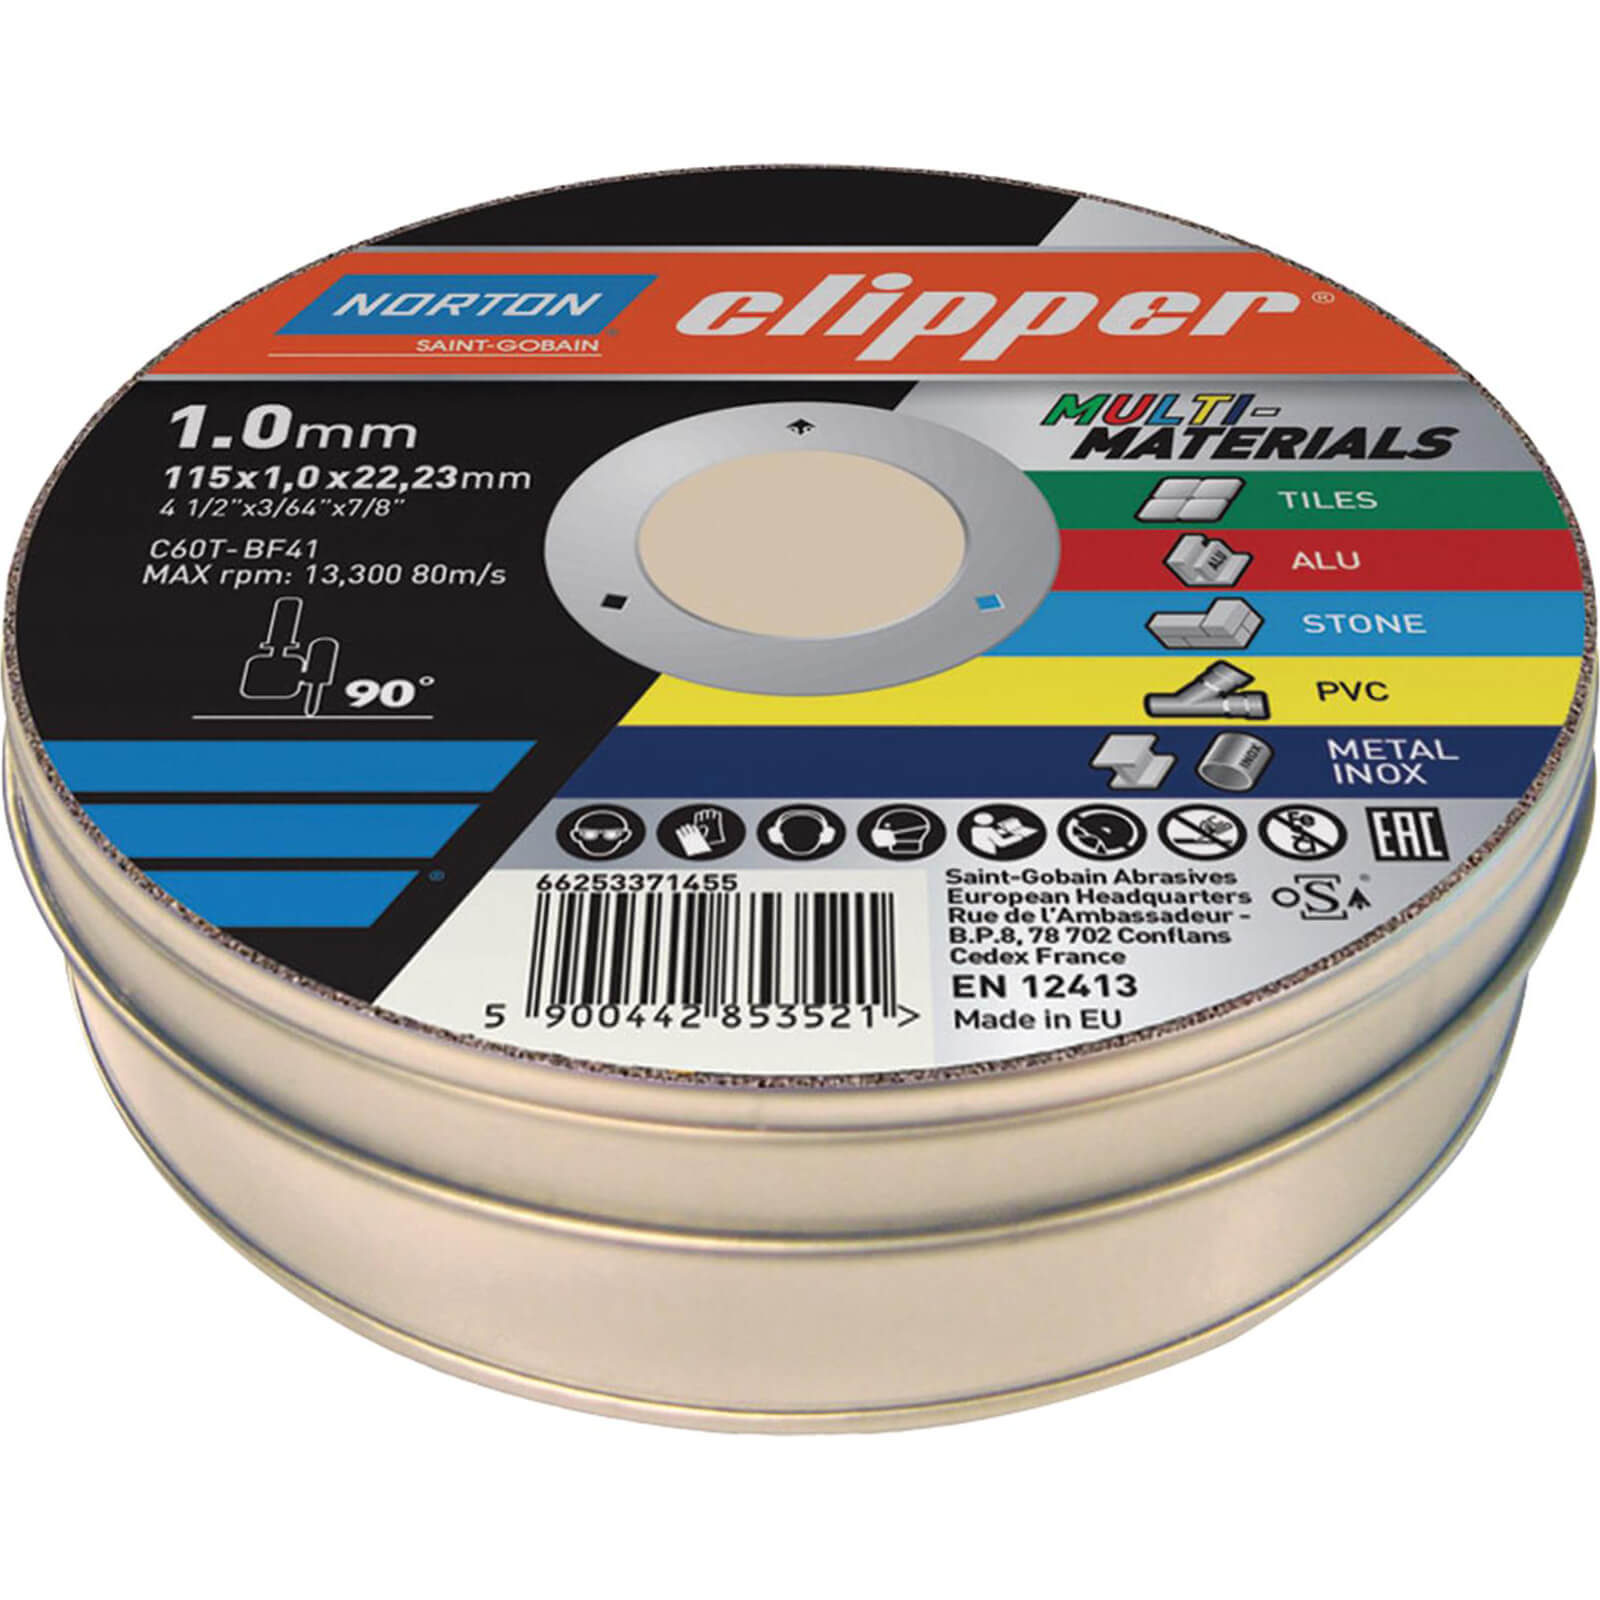 Image of Norton Clipper Multi Material Cutting Disc 115mm Pack of 10